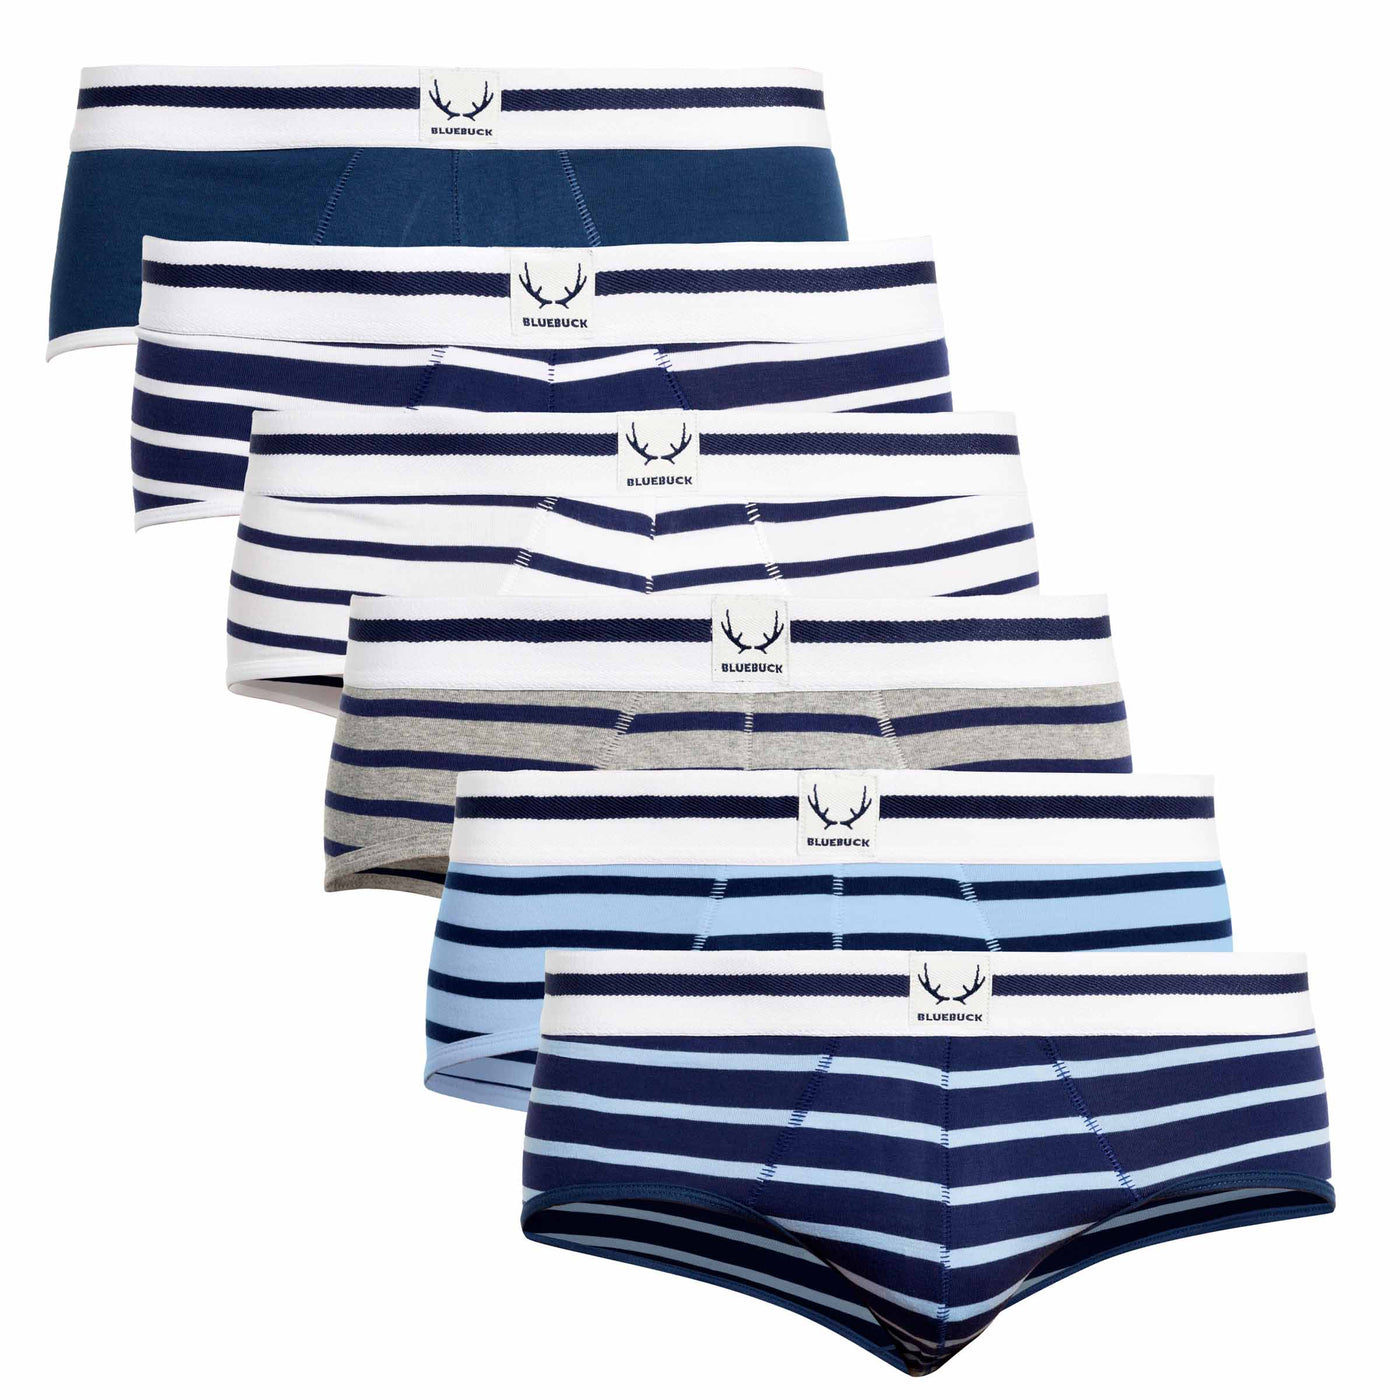 6 nautical briefs for men - blue & grey with stripes